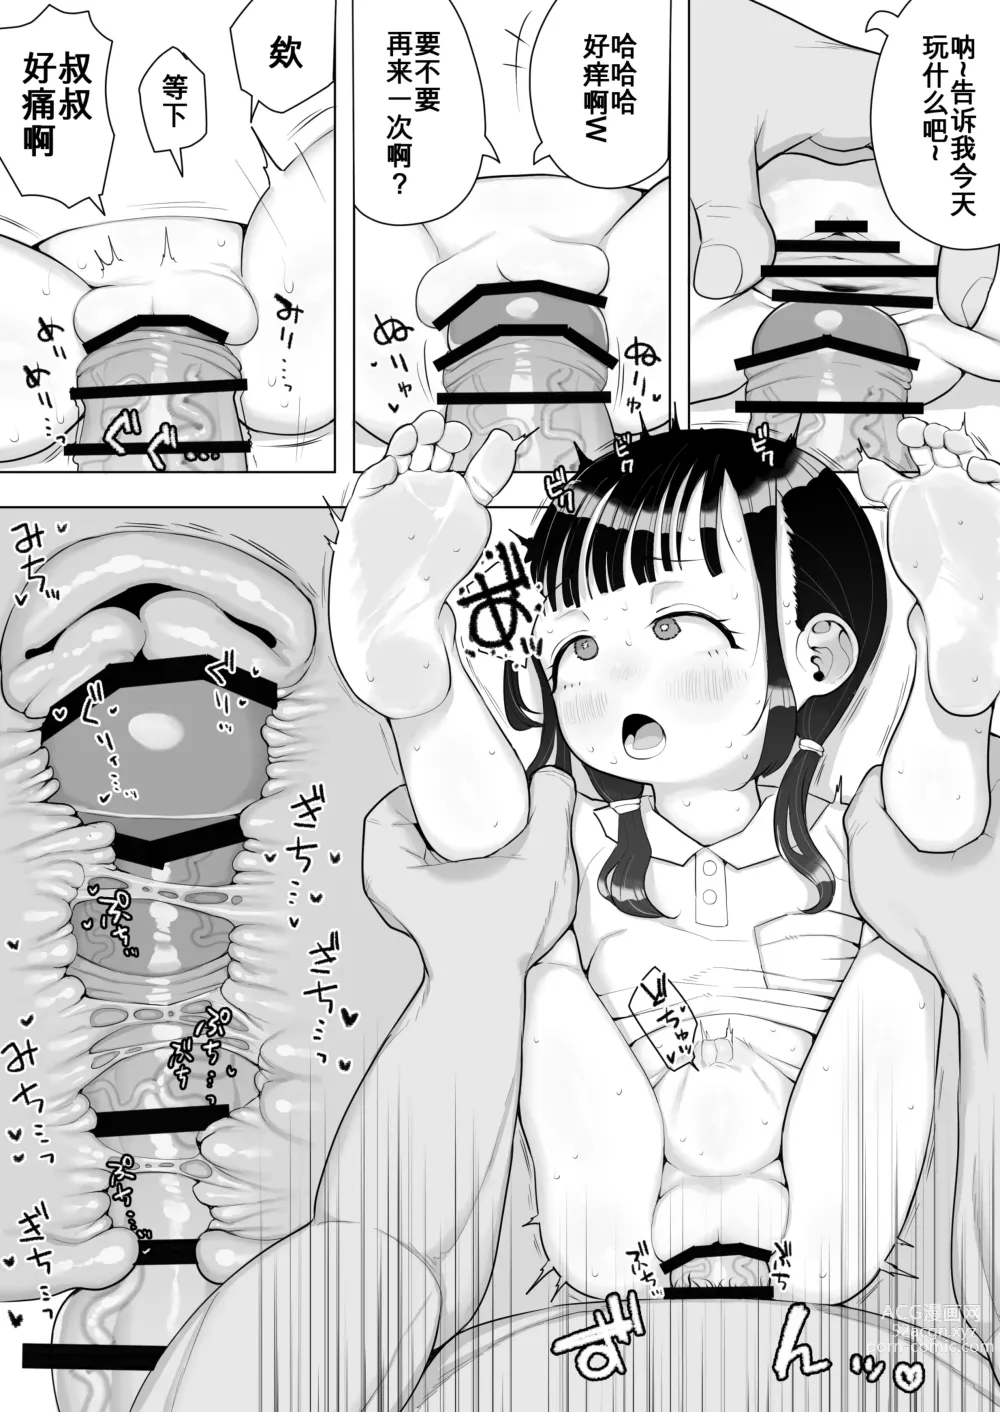 Page 7 of doujinshi Idol research students instant eating manga + ignorant s lower grade student's vaginal ejaculation 3some manga